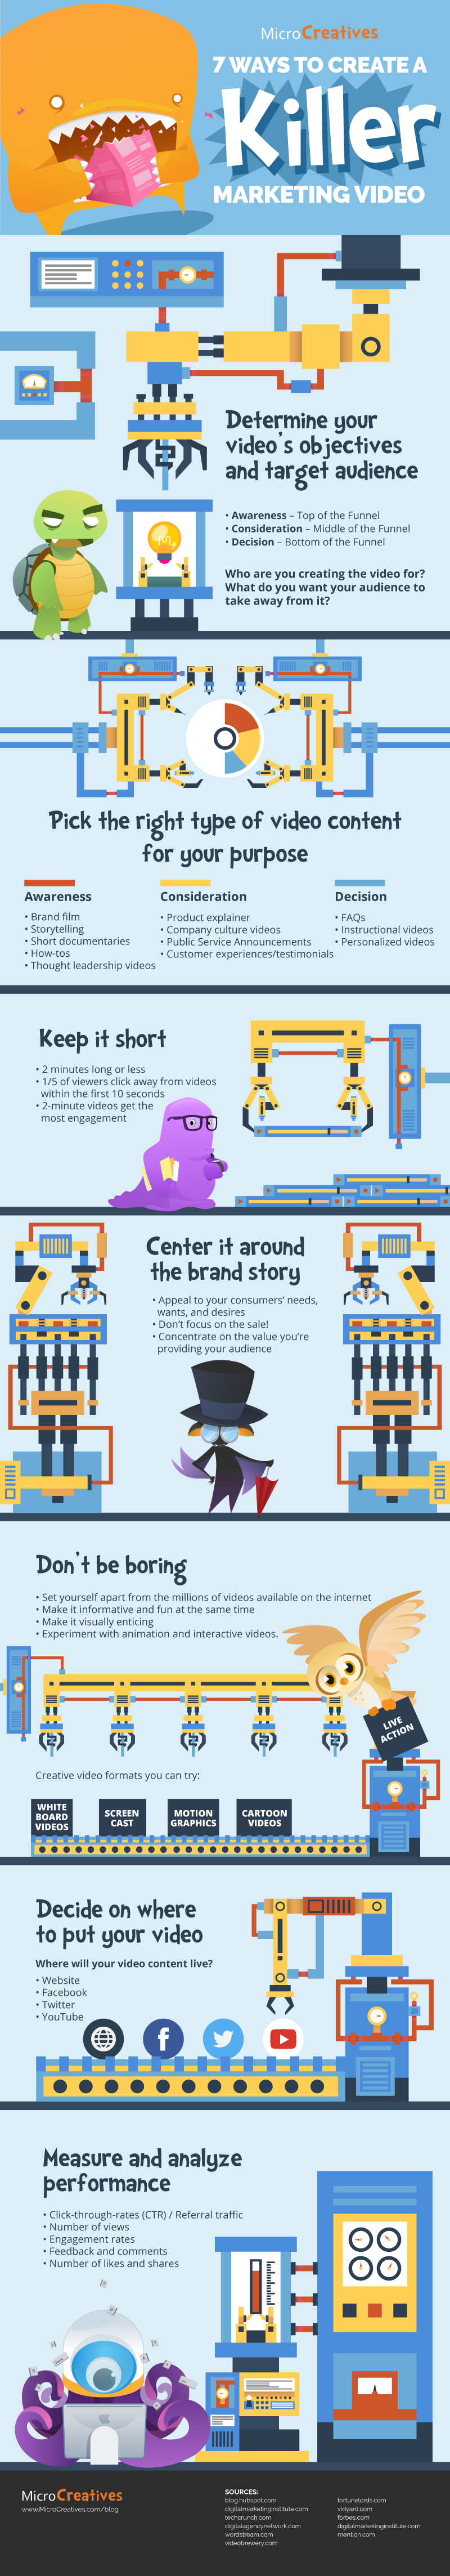 7 Ways to Create a Killer Marketing Video - #Infographic